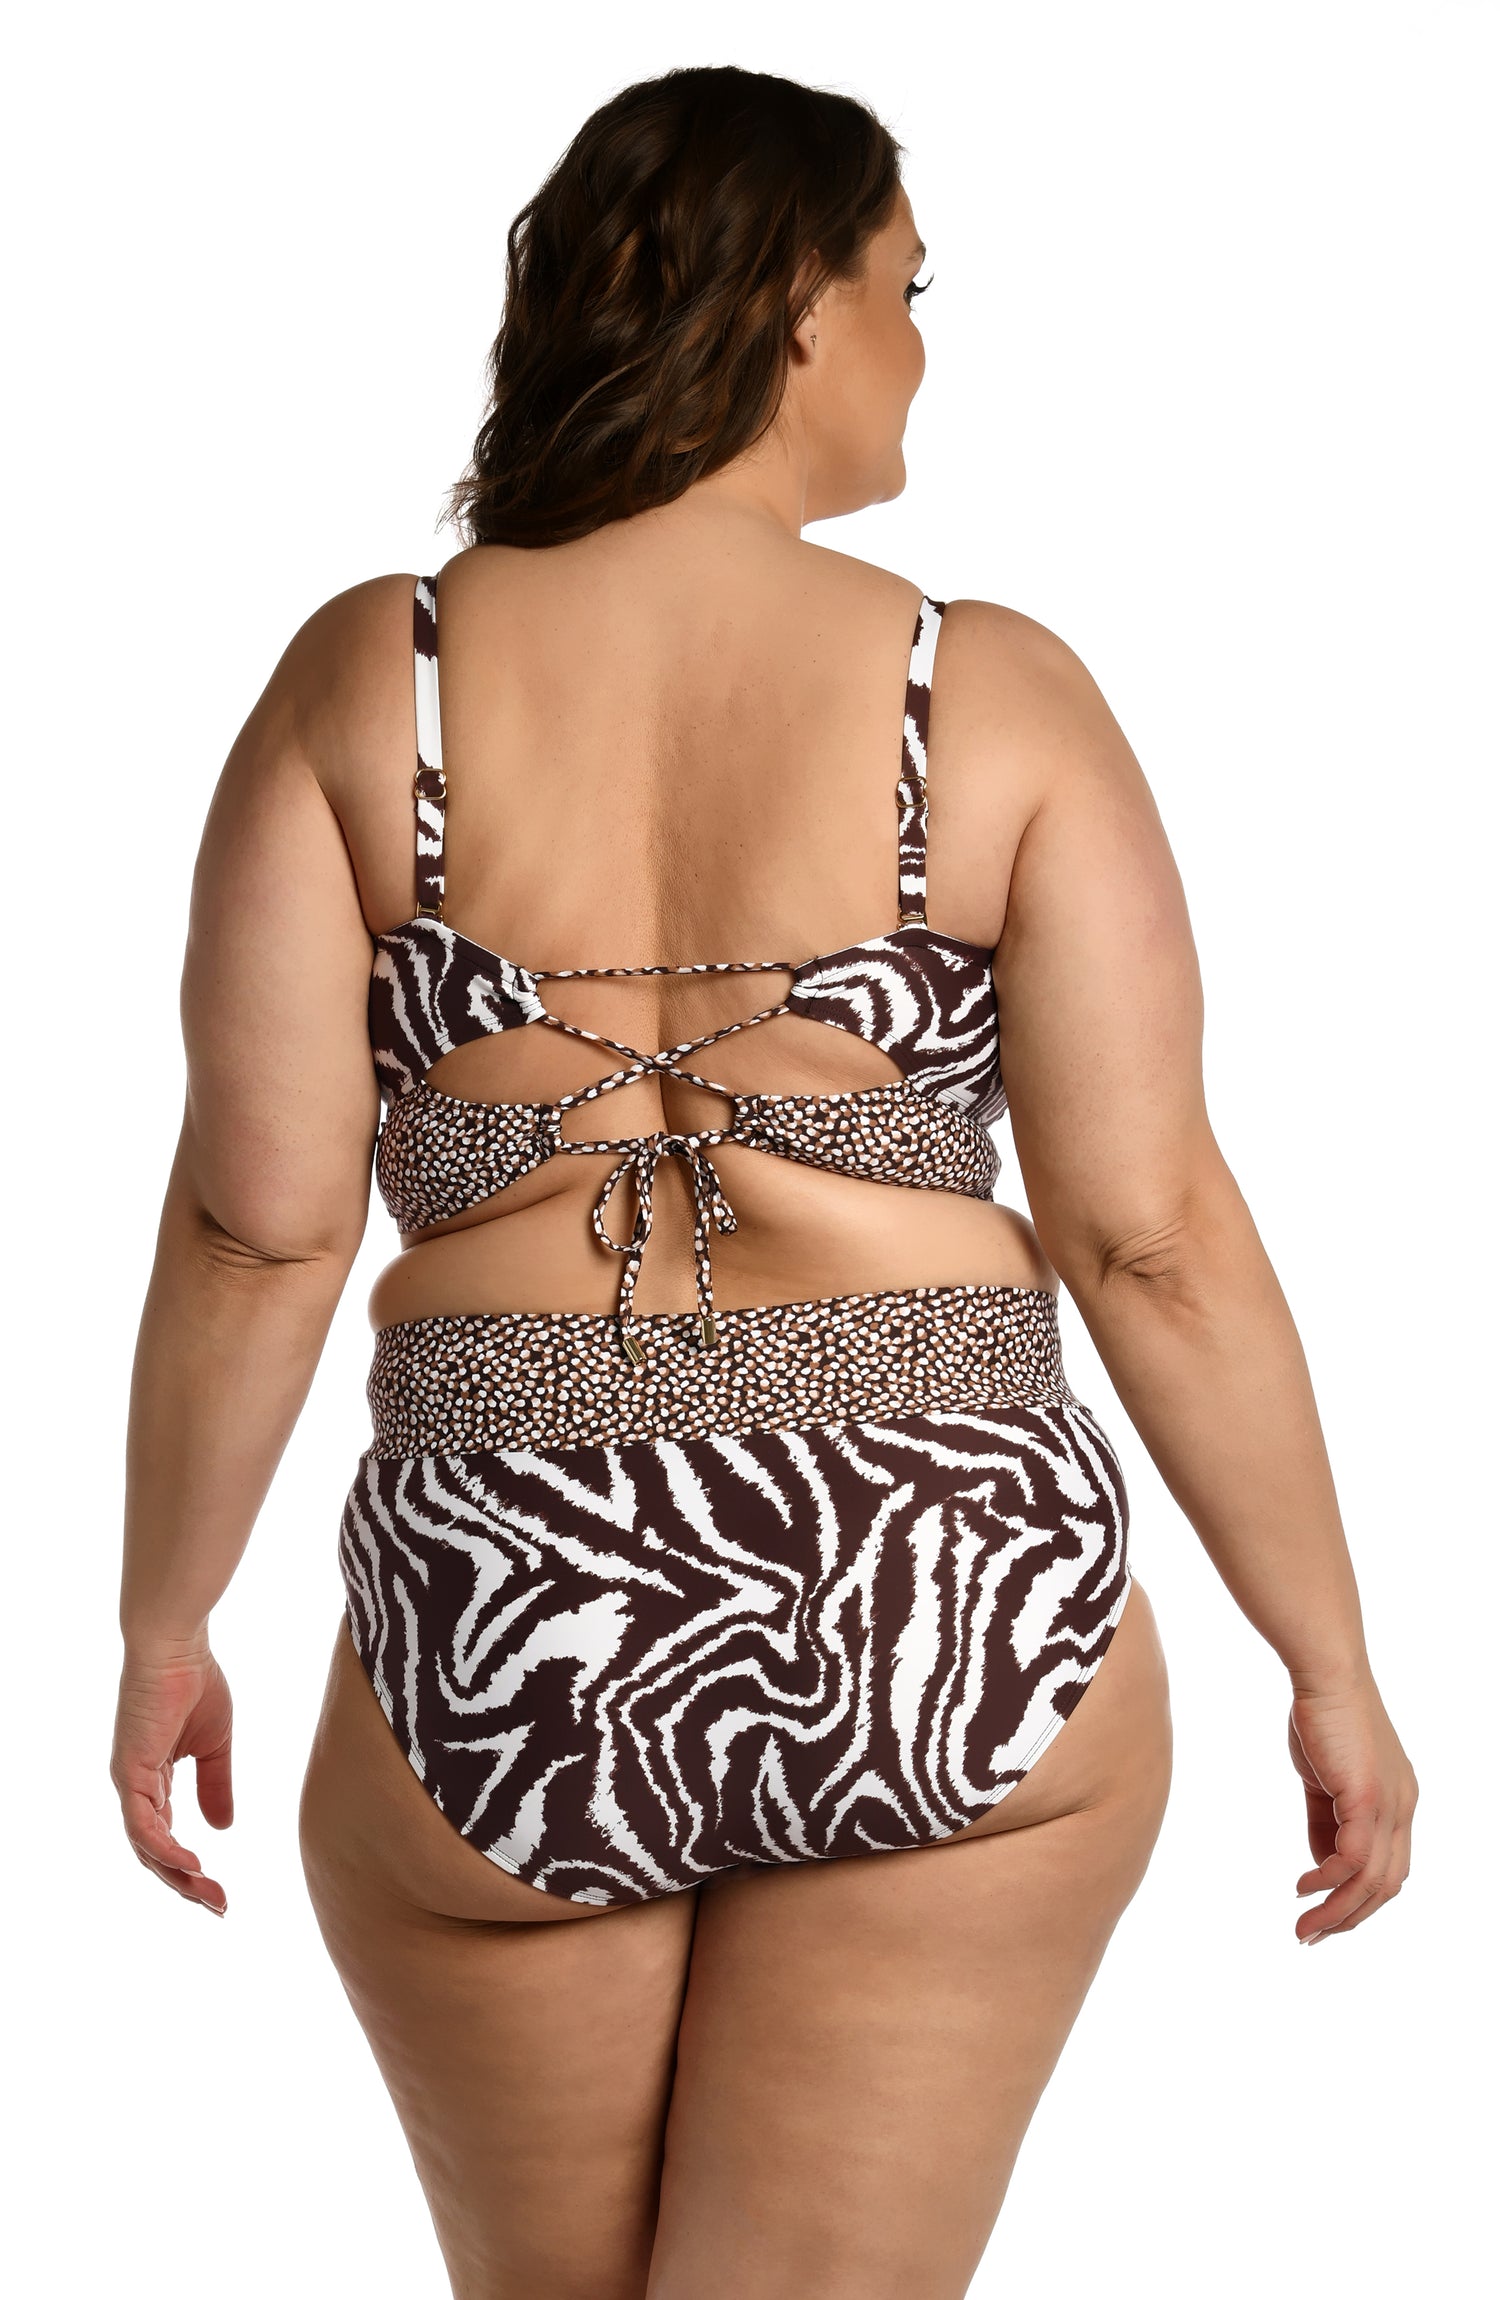 Model is wearing a java colored animal printed bandeau midkini top in our Fierce Lines collection!